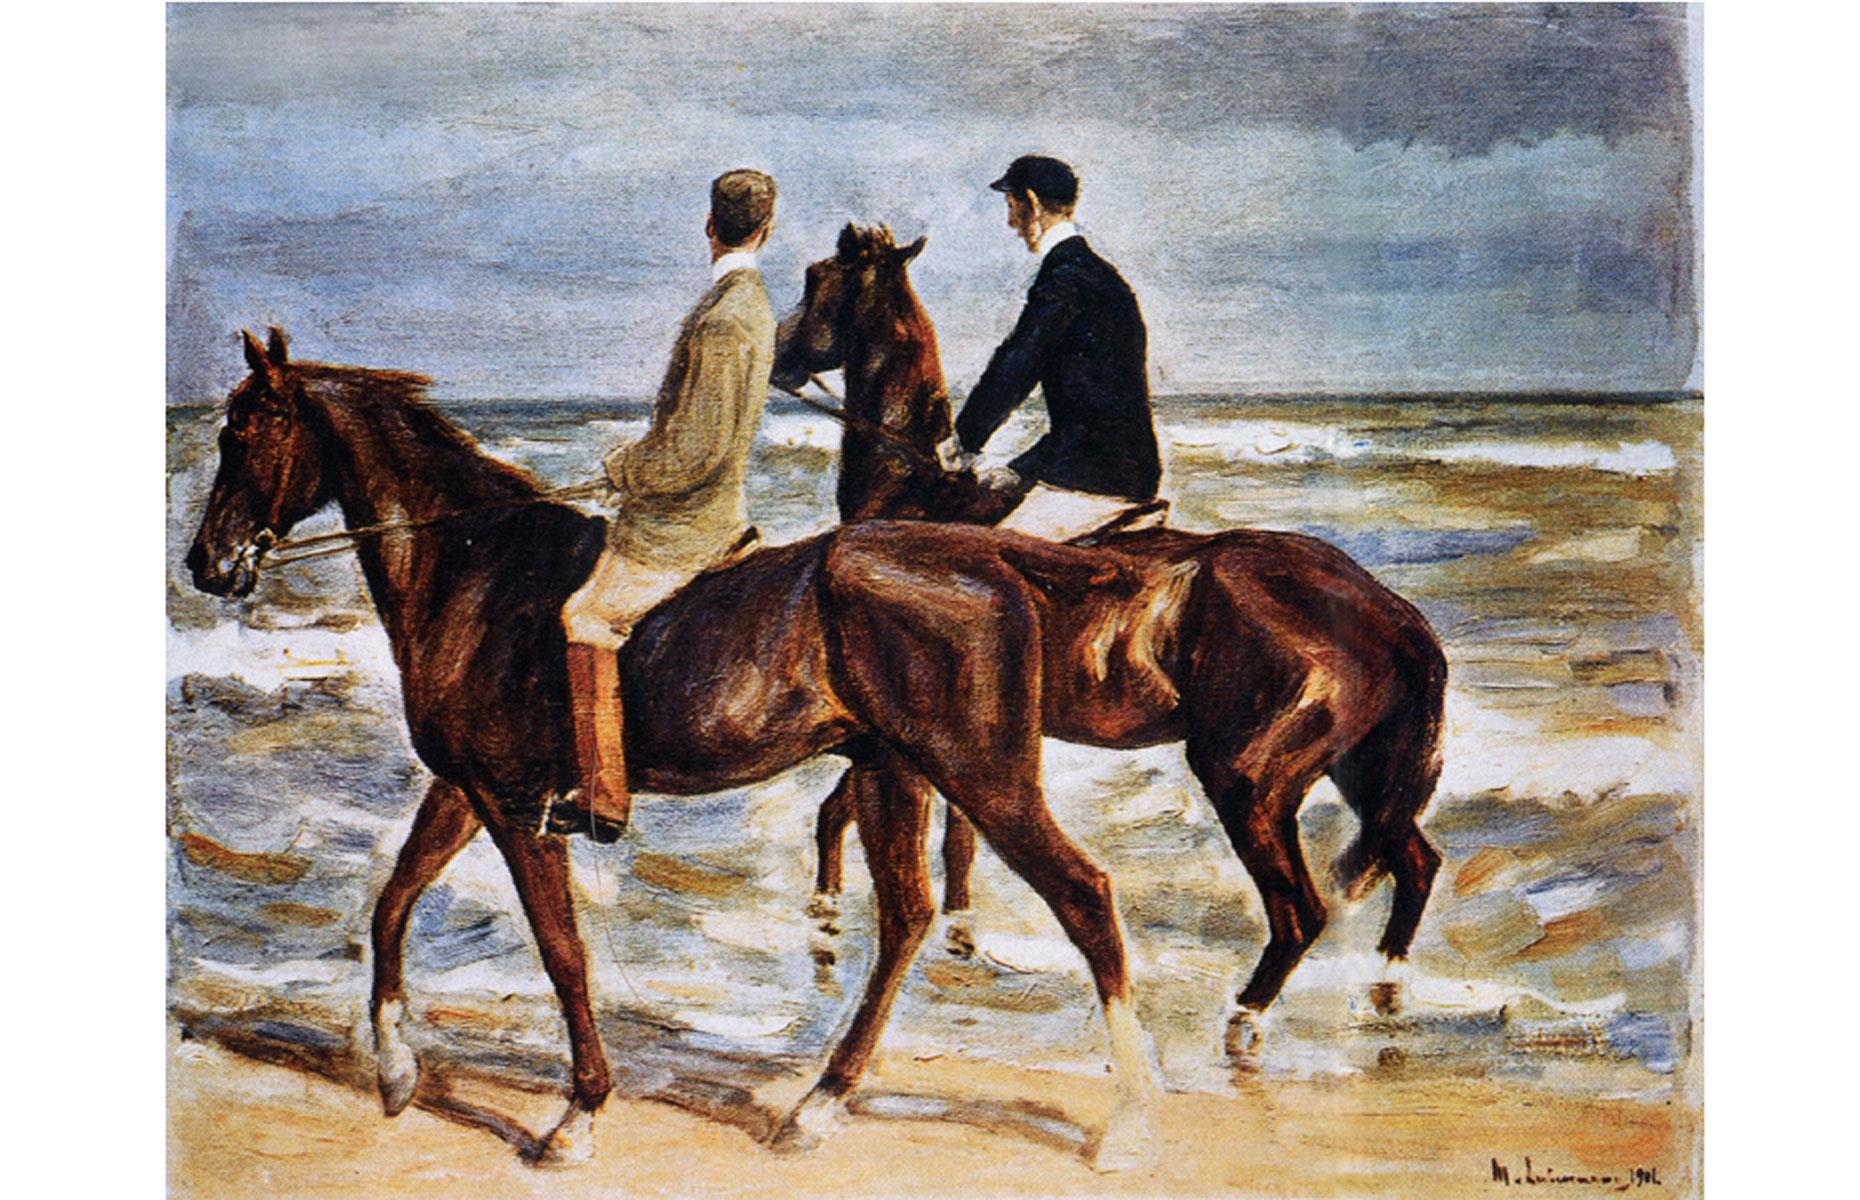 Two Riders on the Beach by Max Liebermann